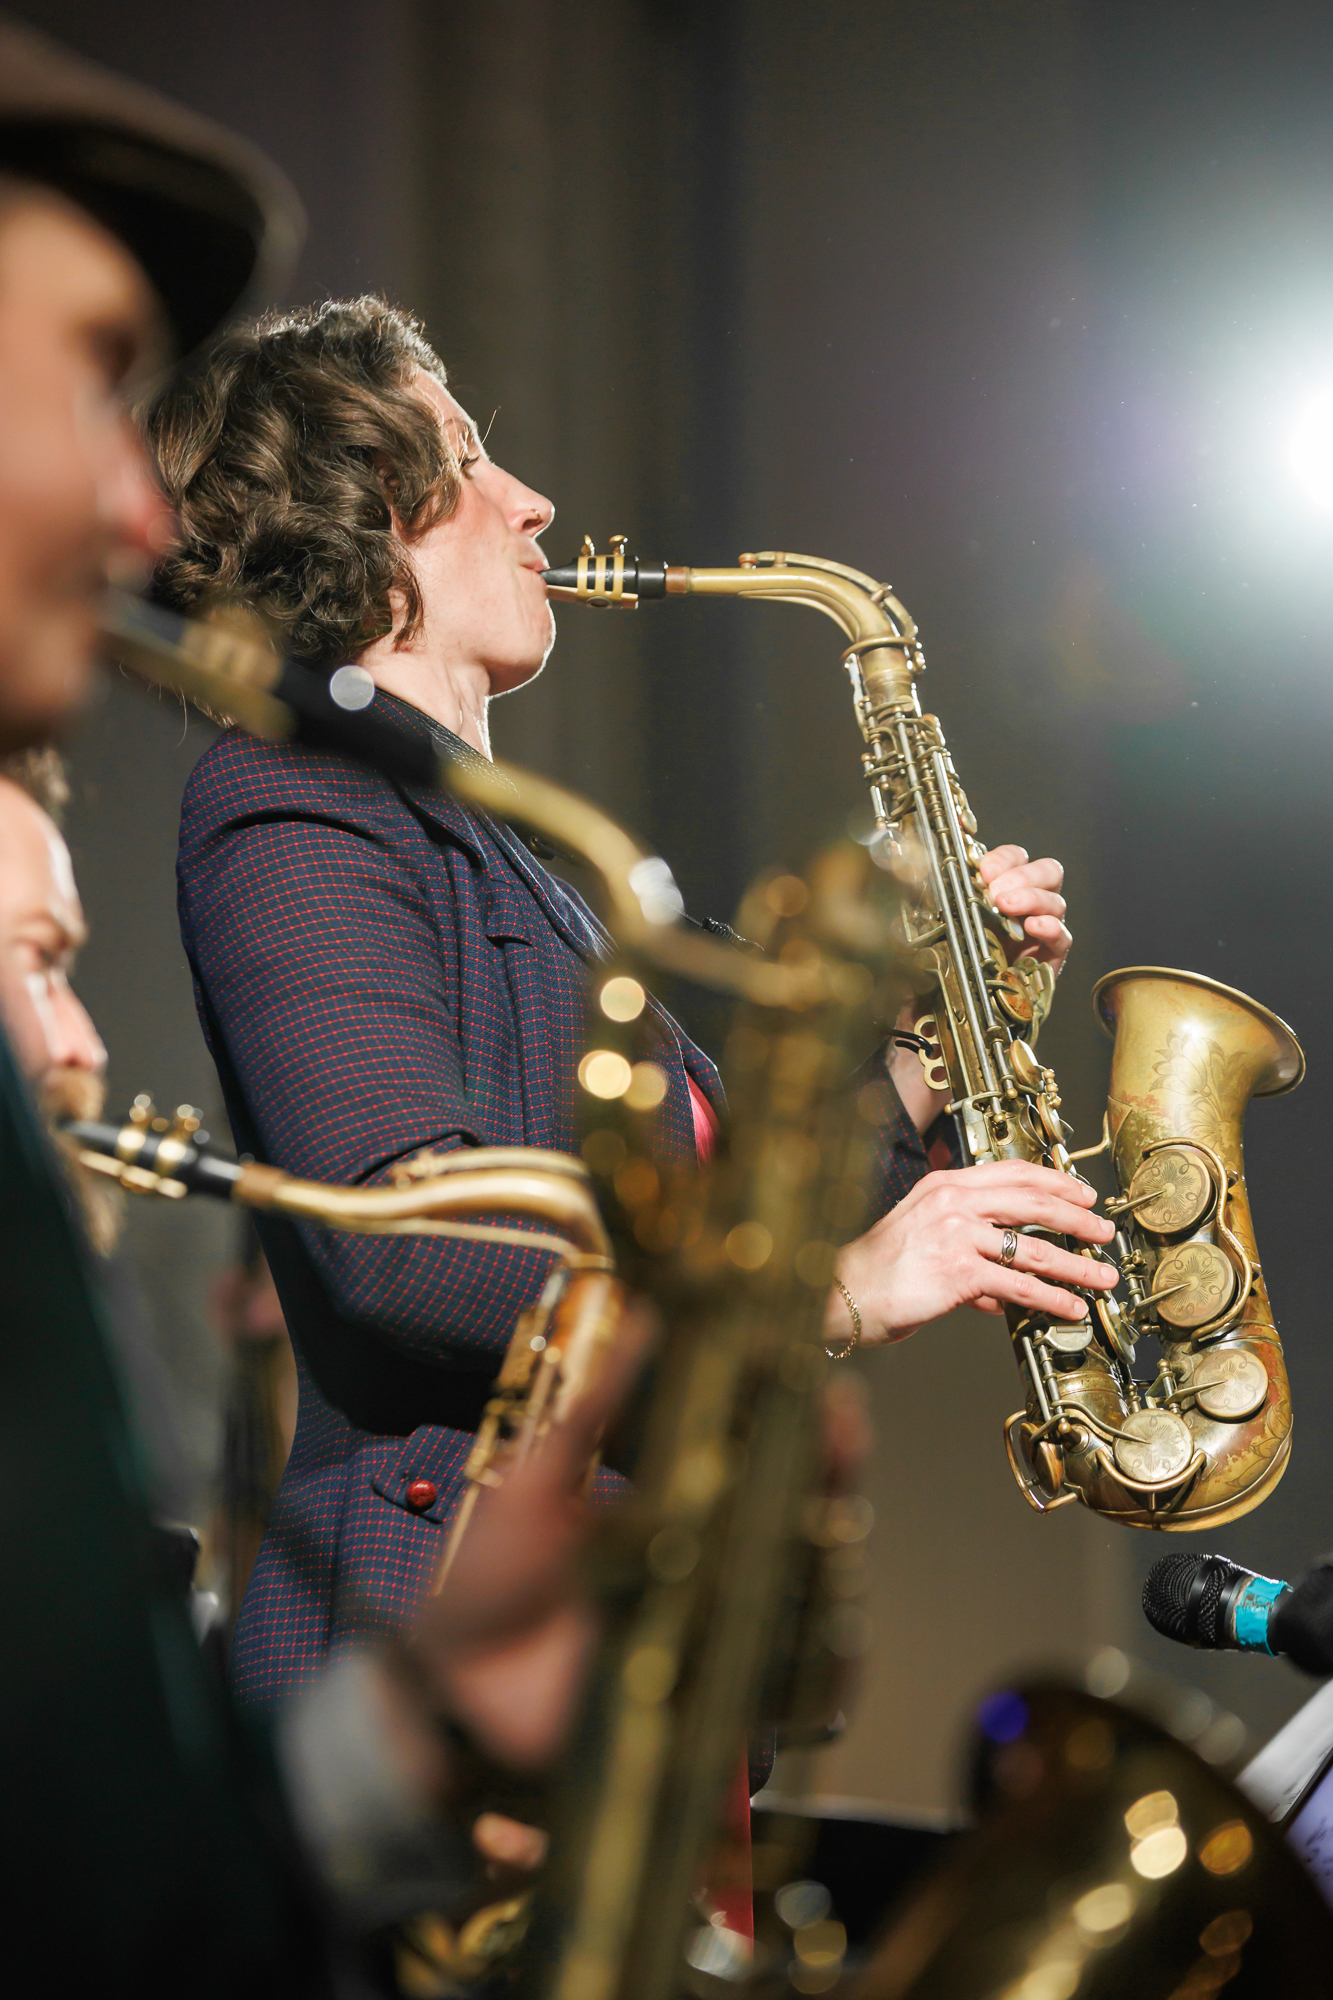 A jazz band performs on stage, featuring a saxophonist in focus playing intensely with others in the background partially visible, instruments in hand. Bright stage lighting enhances the vibrant scene of the musical performance.